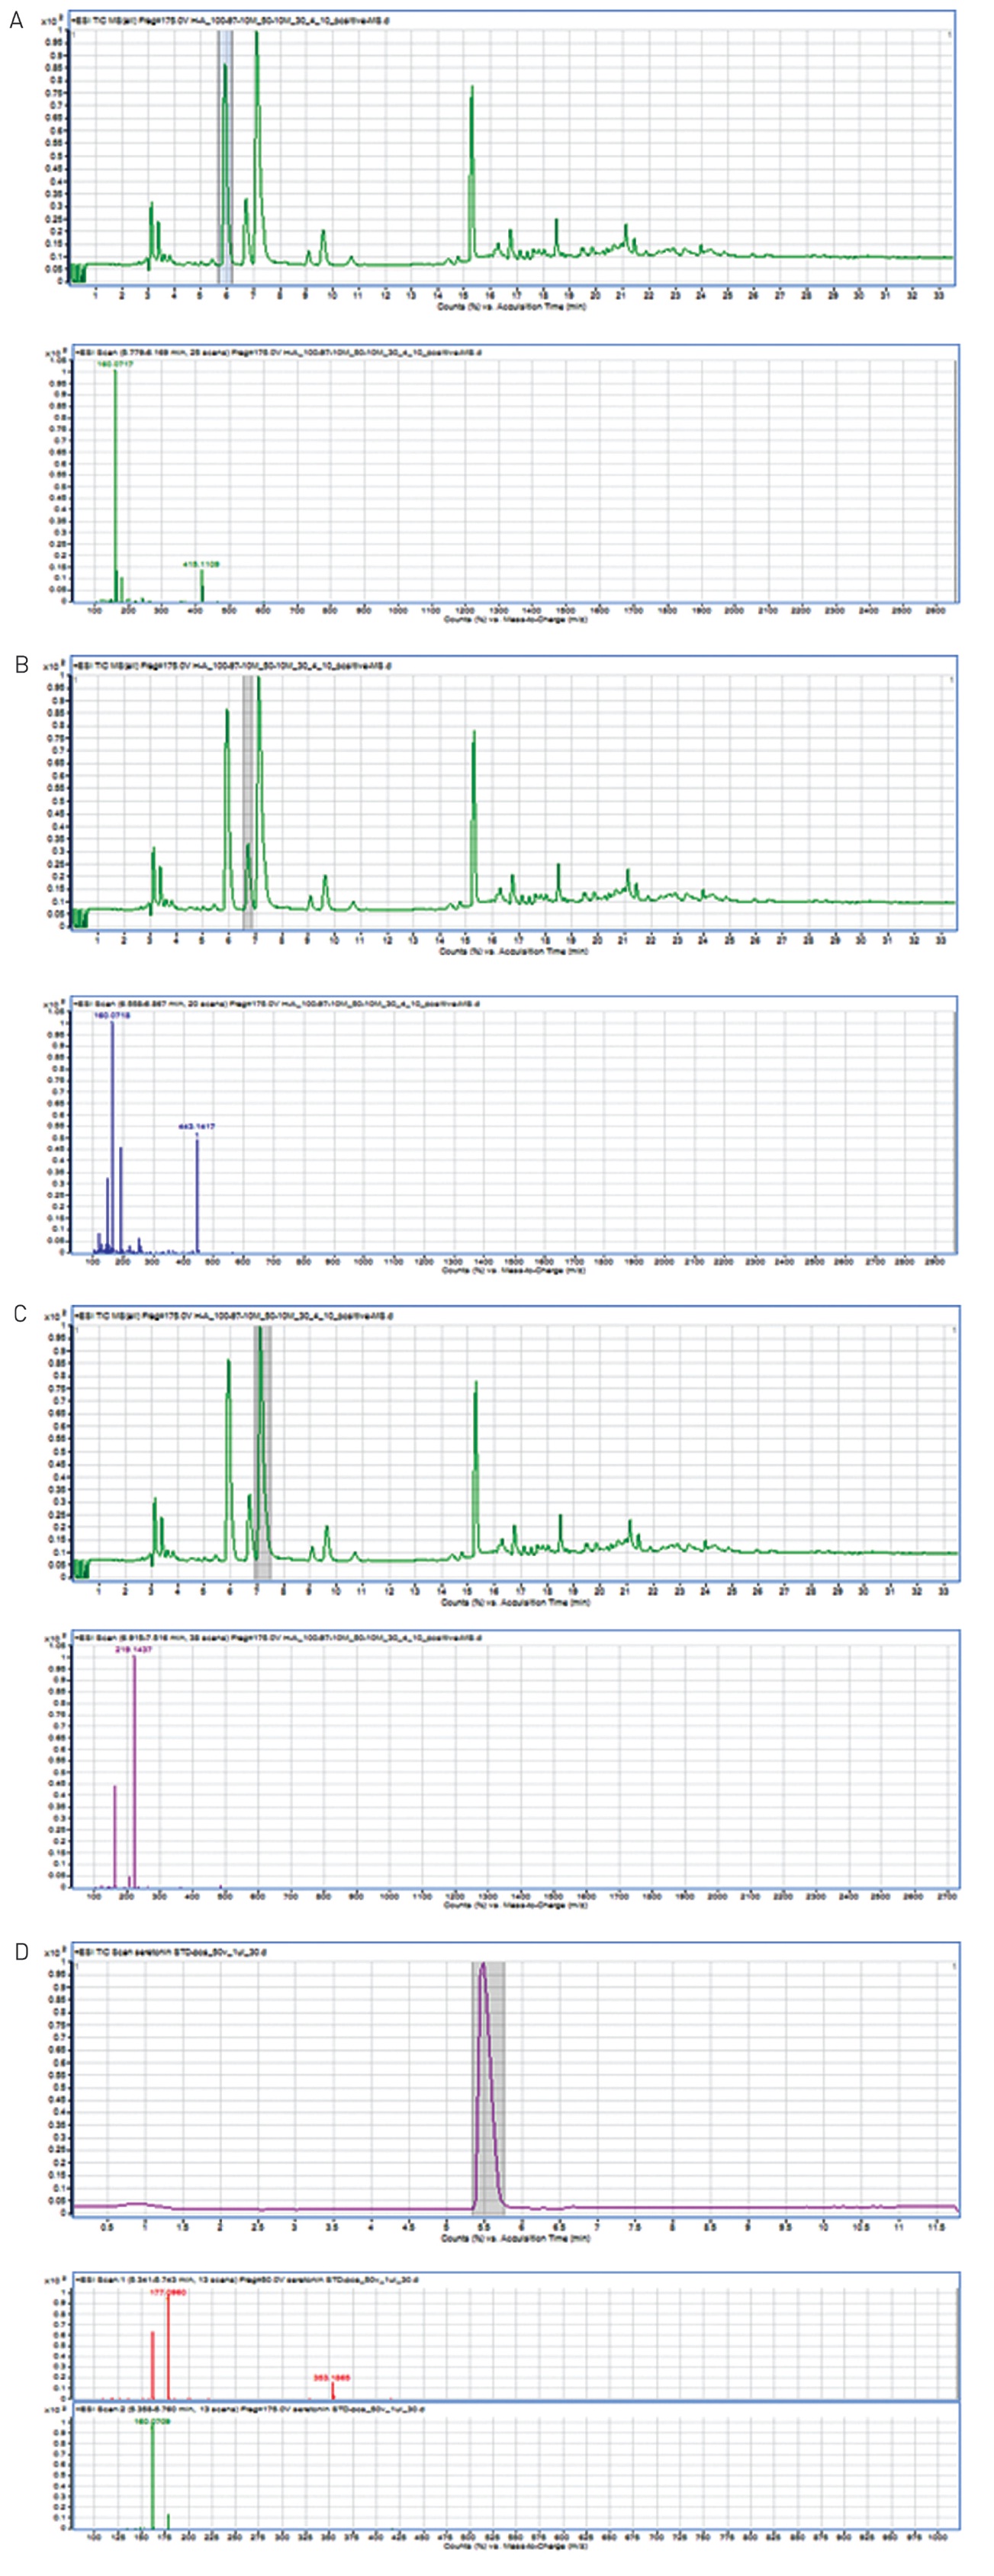 LC-MS chromatograms of water extract in Venenum Bufonis (A: the molecular weight of the first peak was 160.0, B: the molecular weight of the second peak was 160.0, C: the molecular weight of the third peak was 219.1, and D: the molecular weight of the standard serotonin was 177.0).